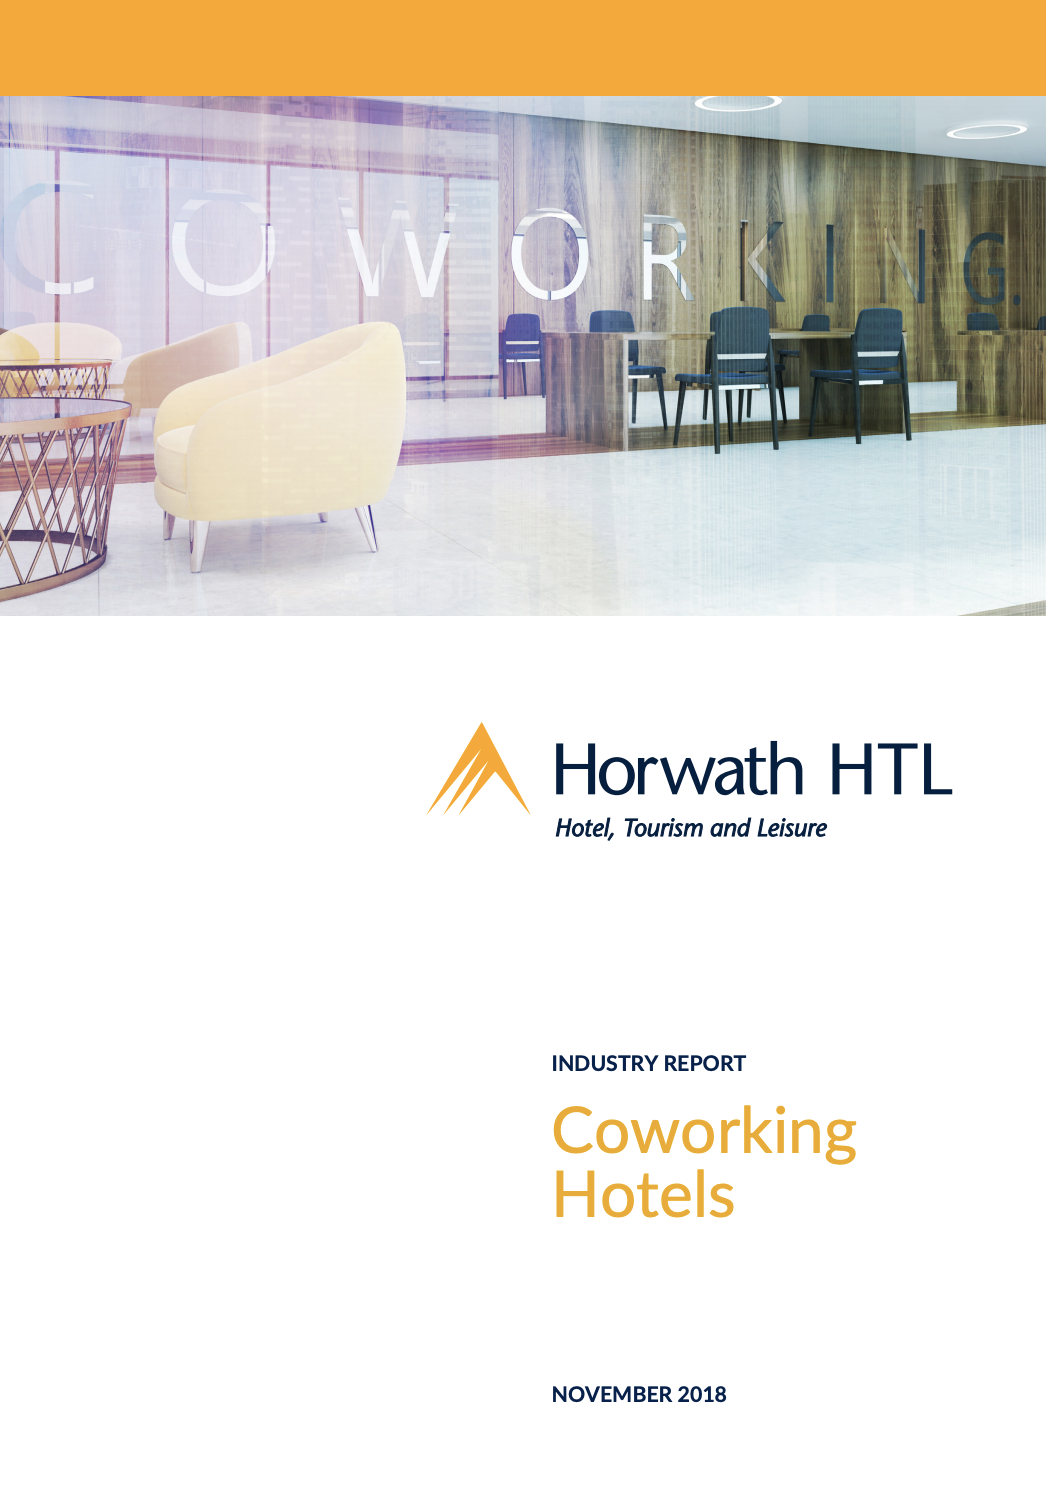 Industry Report: Coworking Hotels